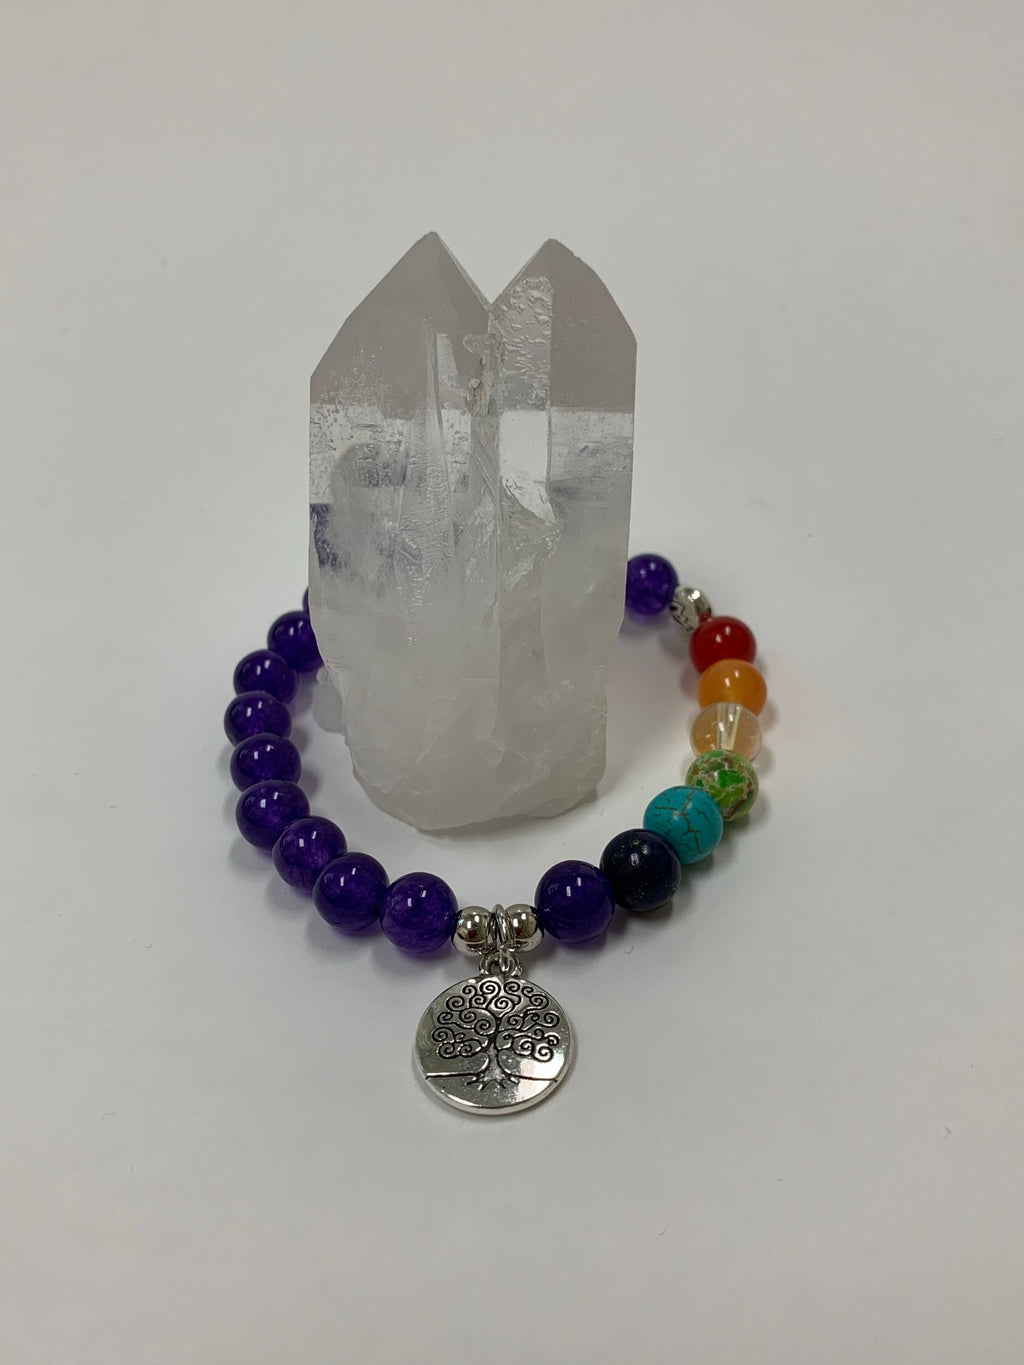 Power bracelet with all amethyst beads except 7 beads to match the chakras. Beads are 8mm. This bracelet also comes with a silver charm that has a tree of life etched in it in black. The beads are genuine but the color has been enhanced.  